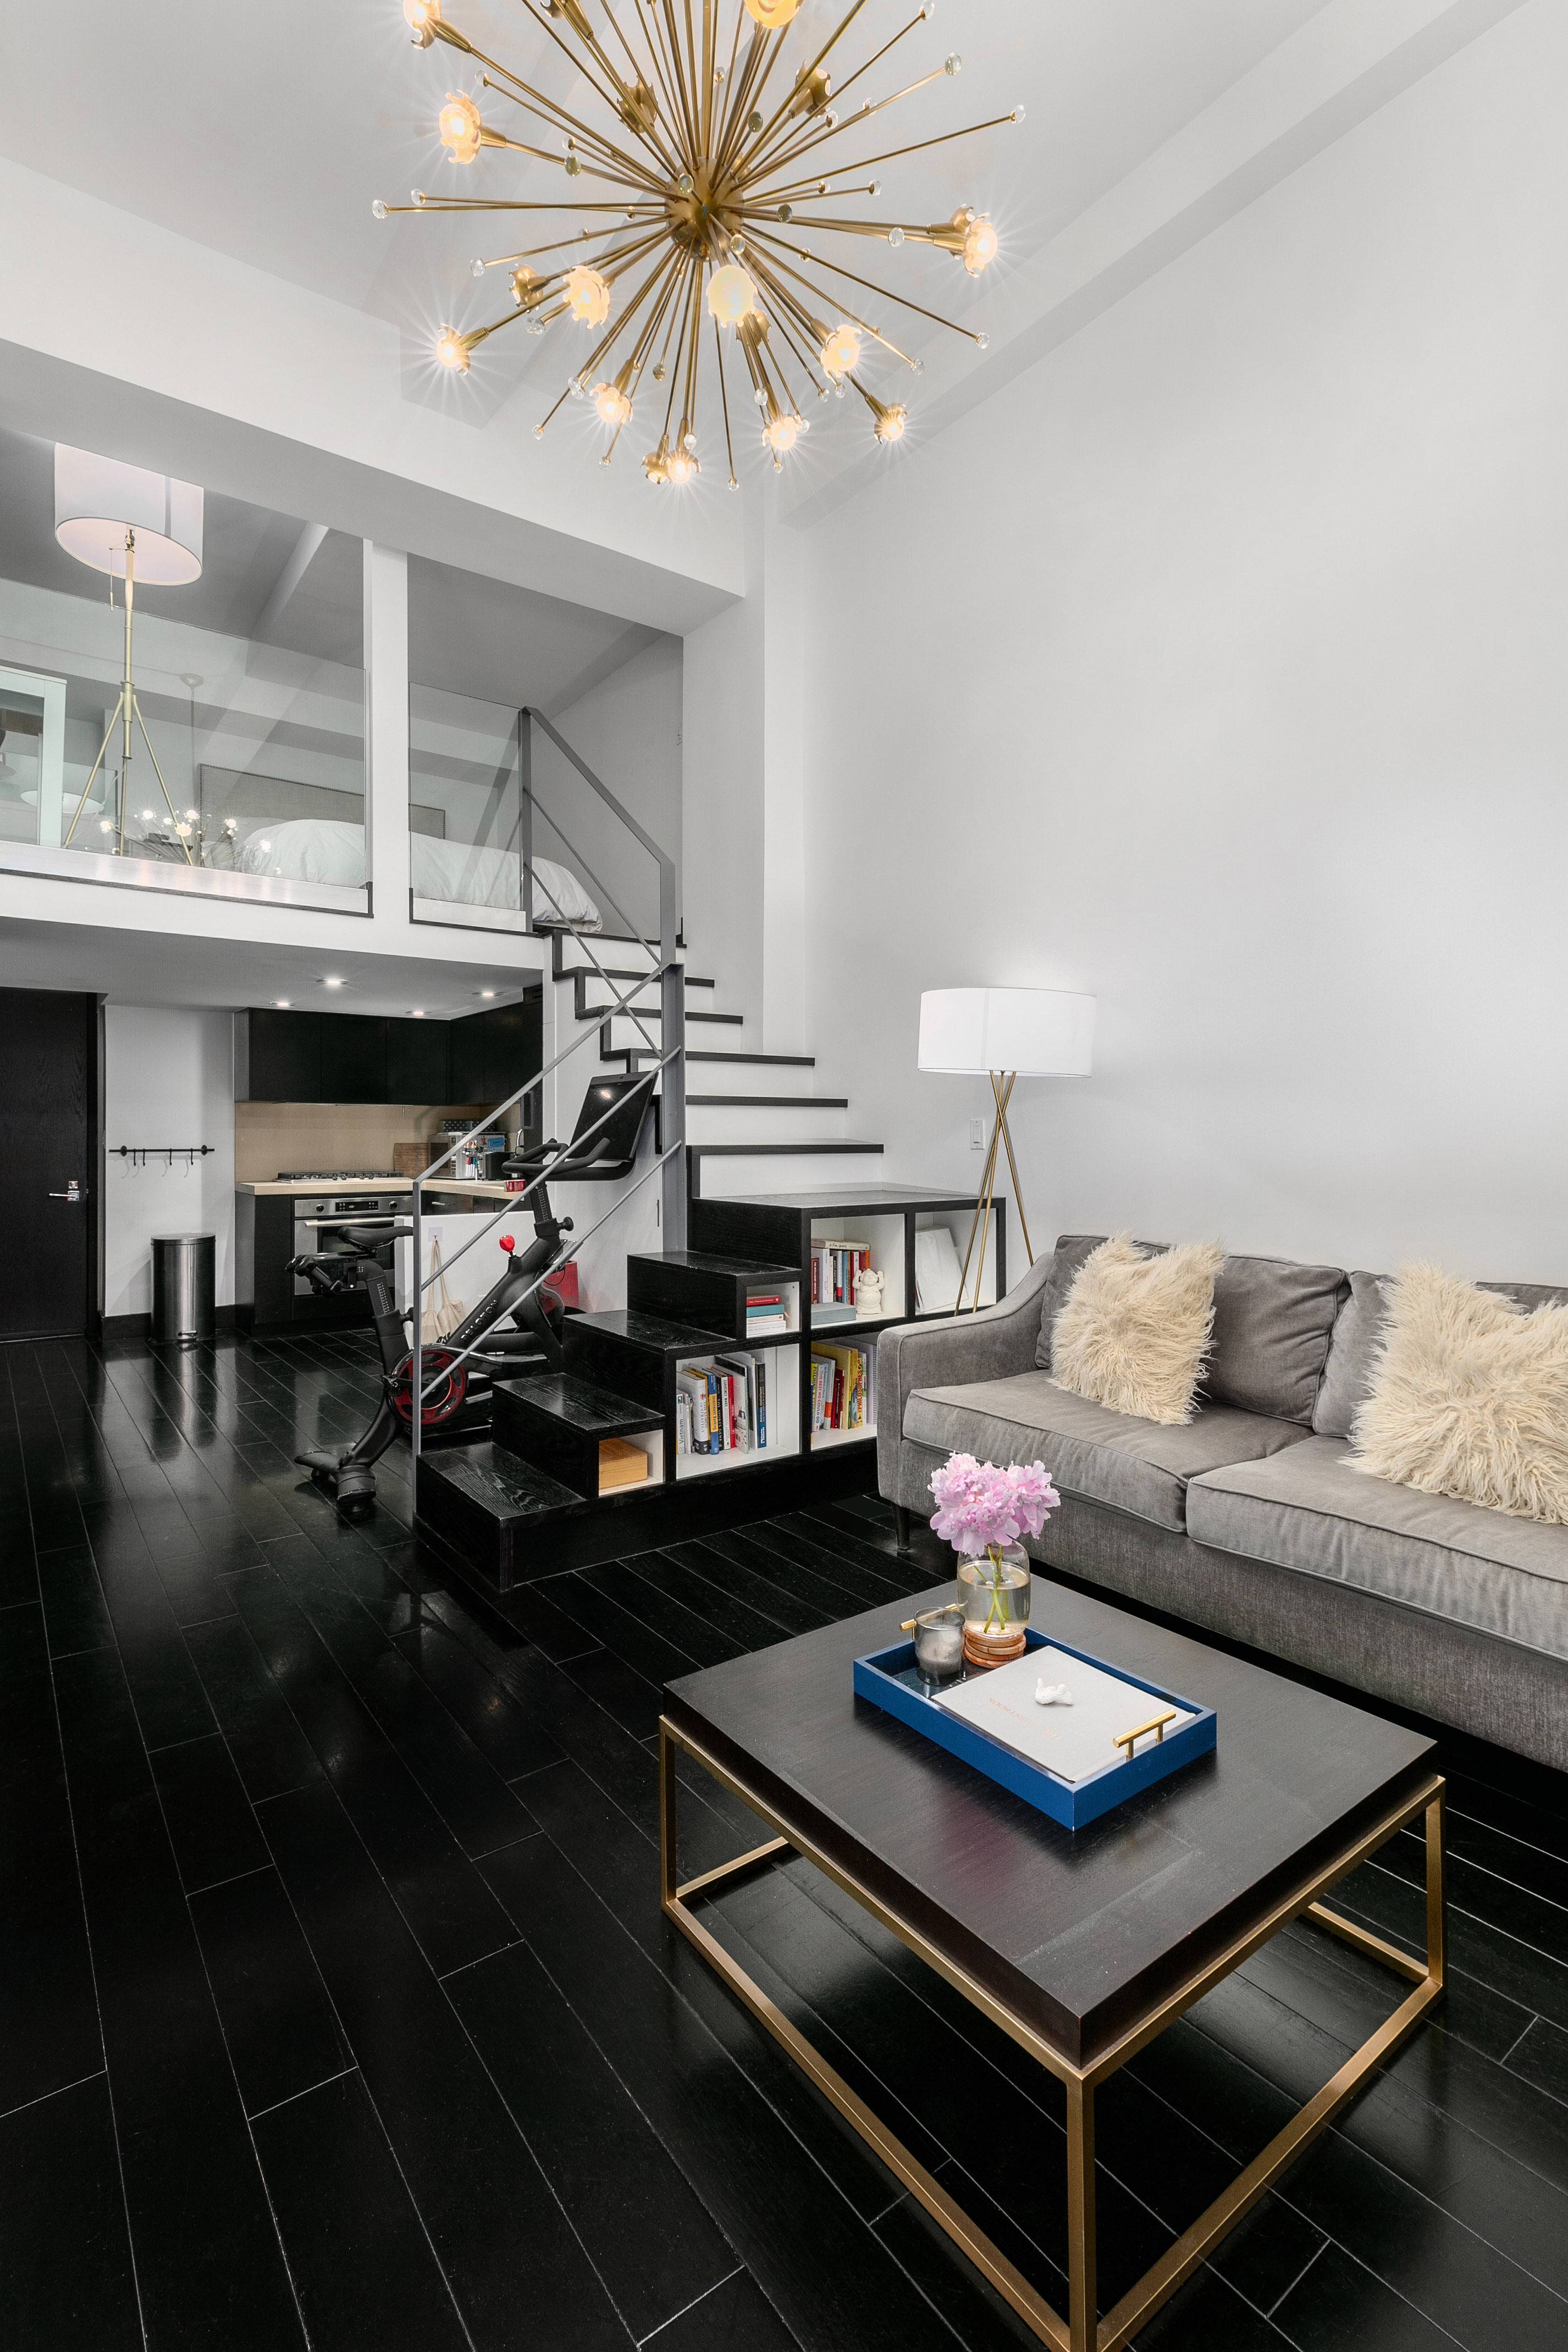 3N at 254 Park Avenue South is a downtown studio loft centrally located along the best part of Park Avenue.